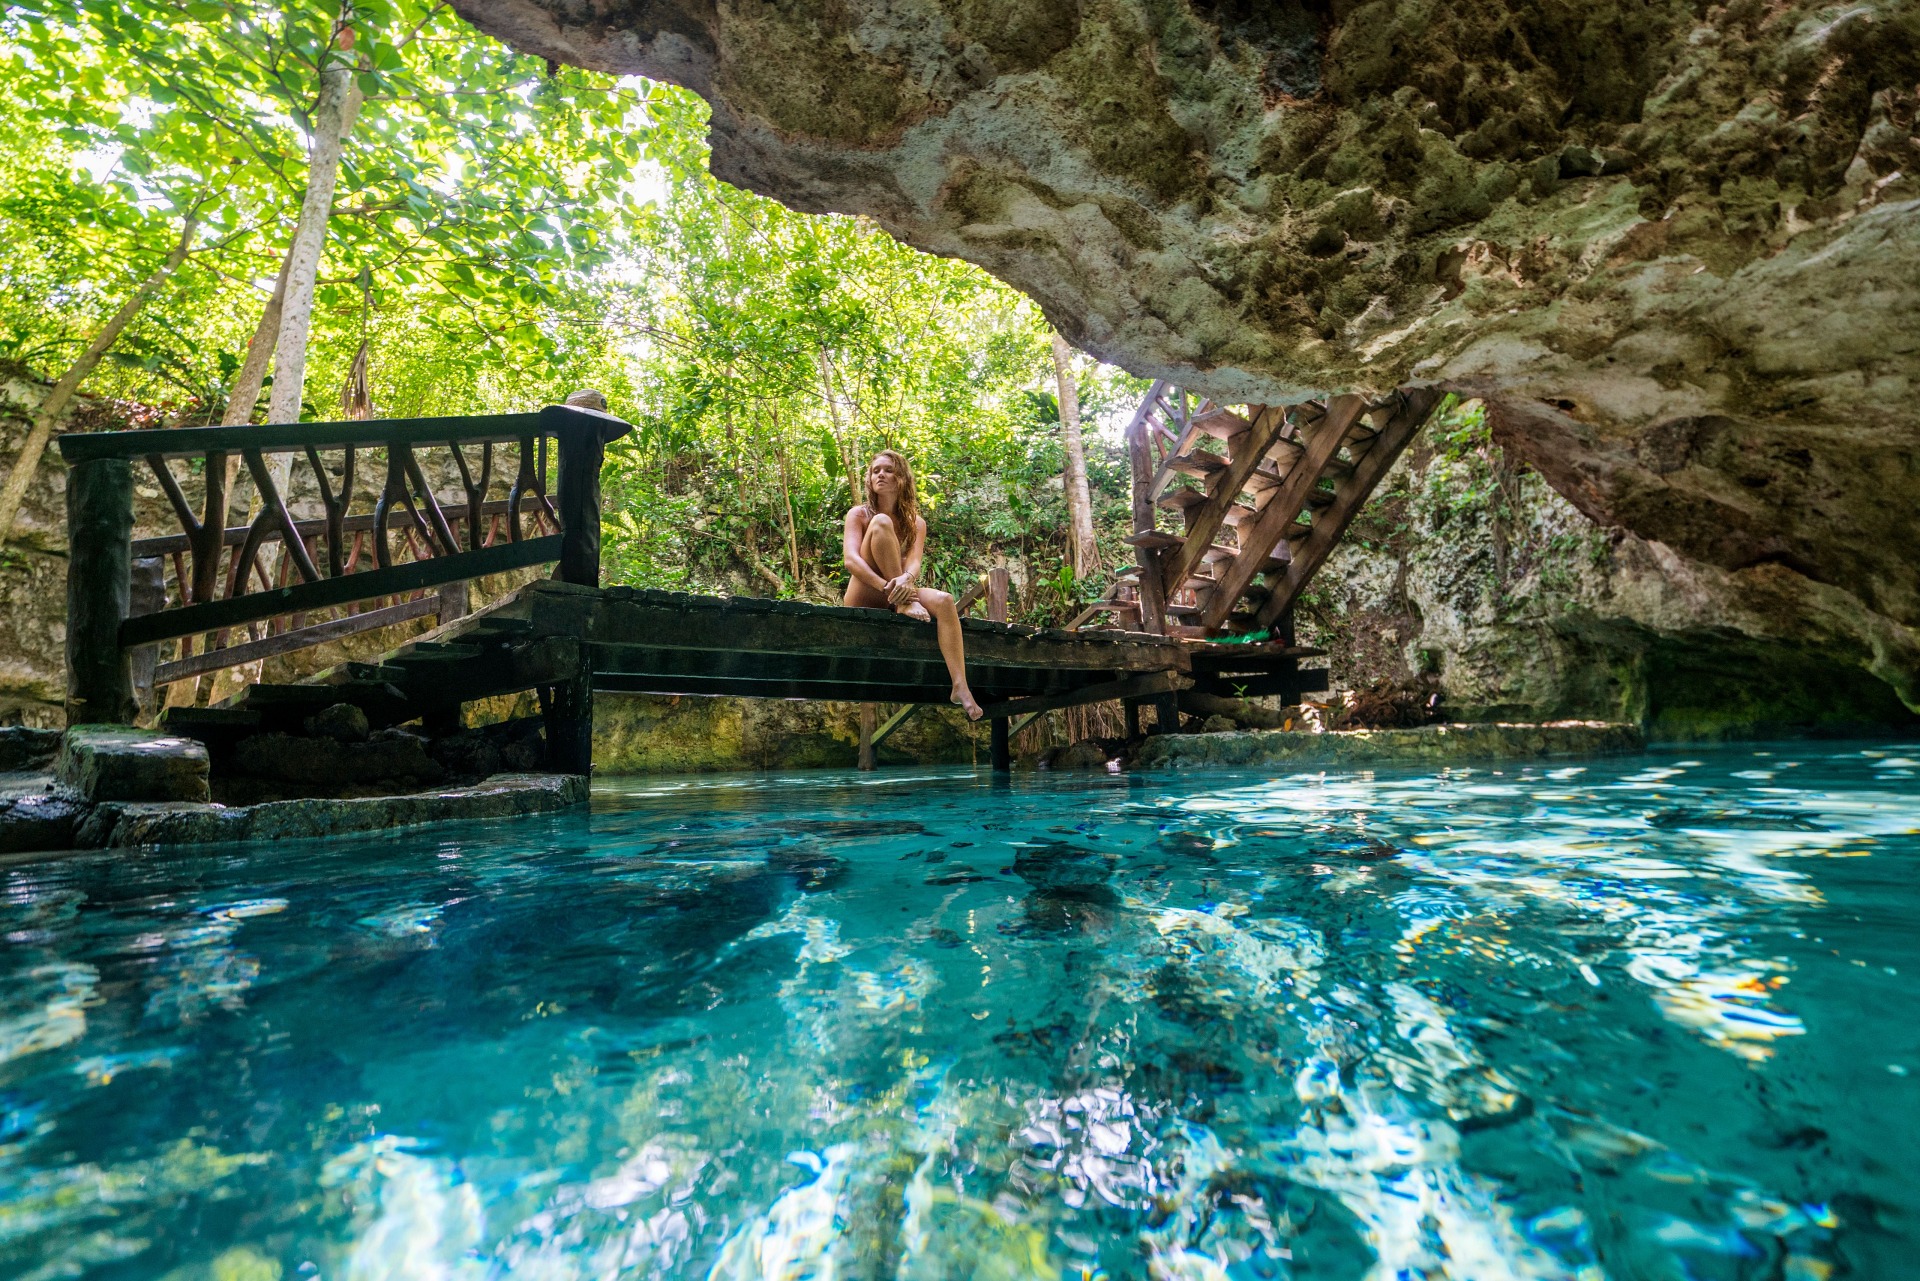 Costa Maya, Mexico, Yucatán, woman sitting on edge of walkway, bridge, over large underground pool, limestone cave, tropical trees in background, fun, adventure, resting, relaxing